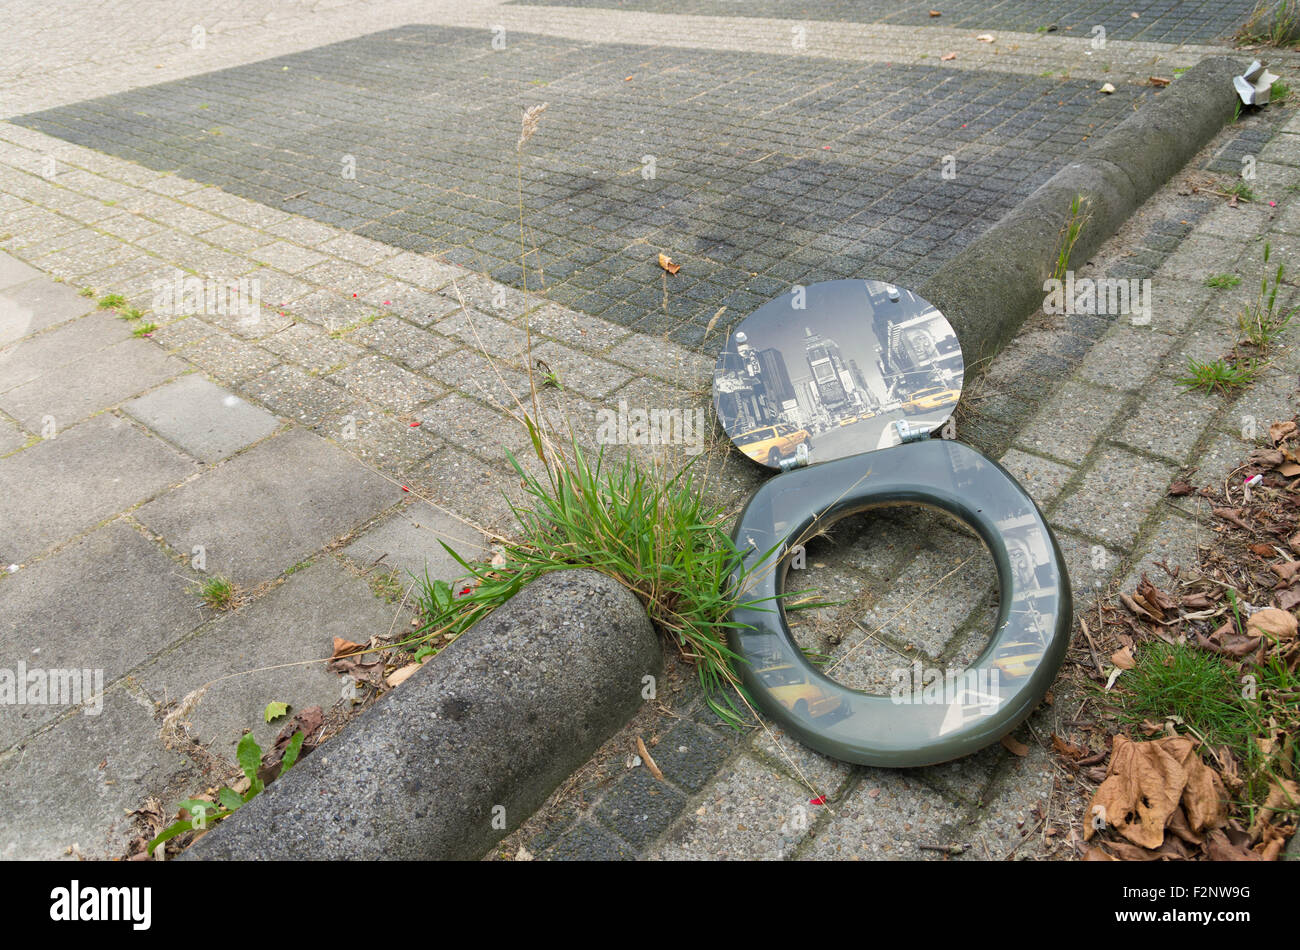 ALMELO, NETHERLANDS - AUGUST 8, 2015: Broken toilet seat with new york print on it left on the street Stock Photo